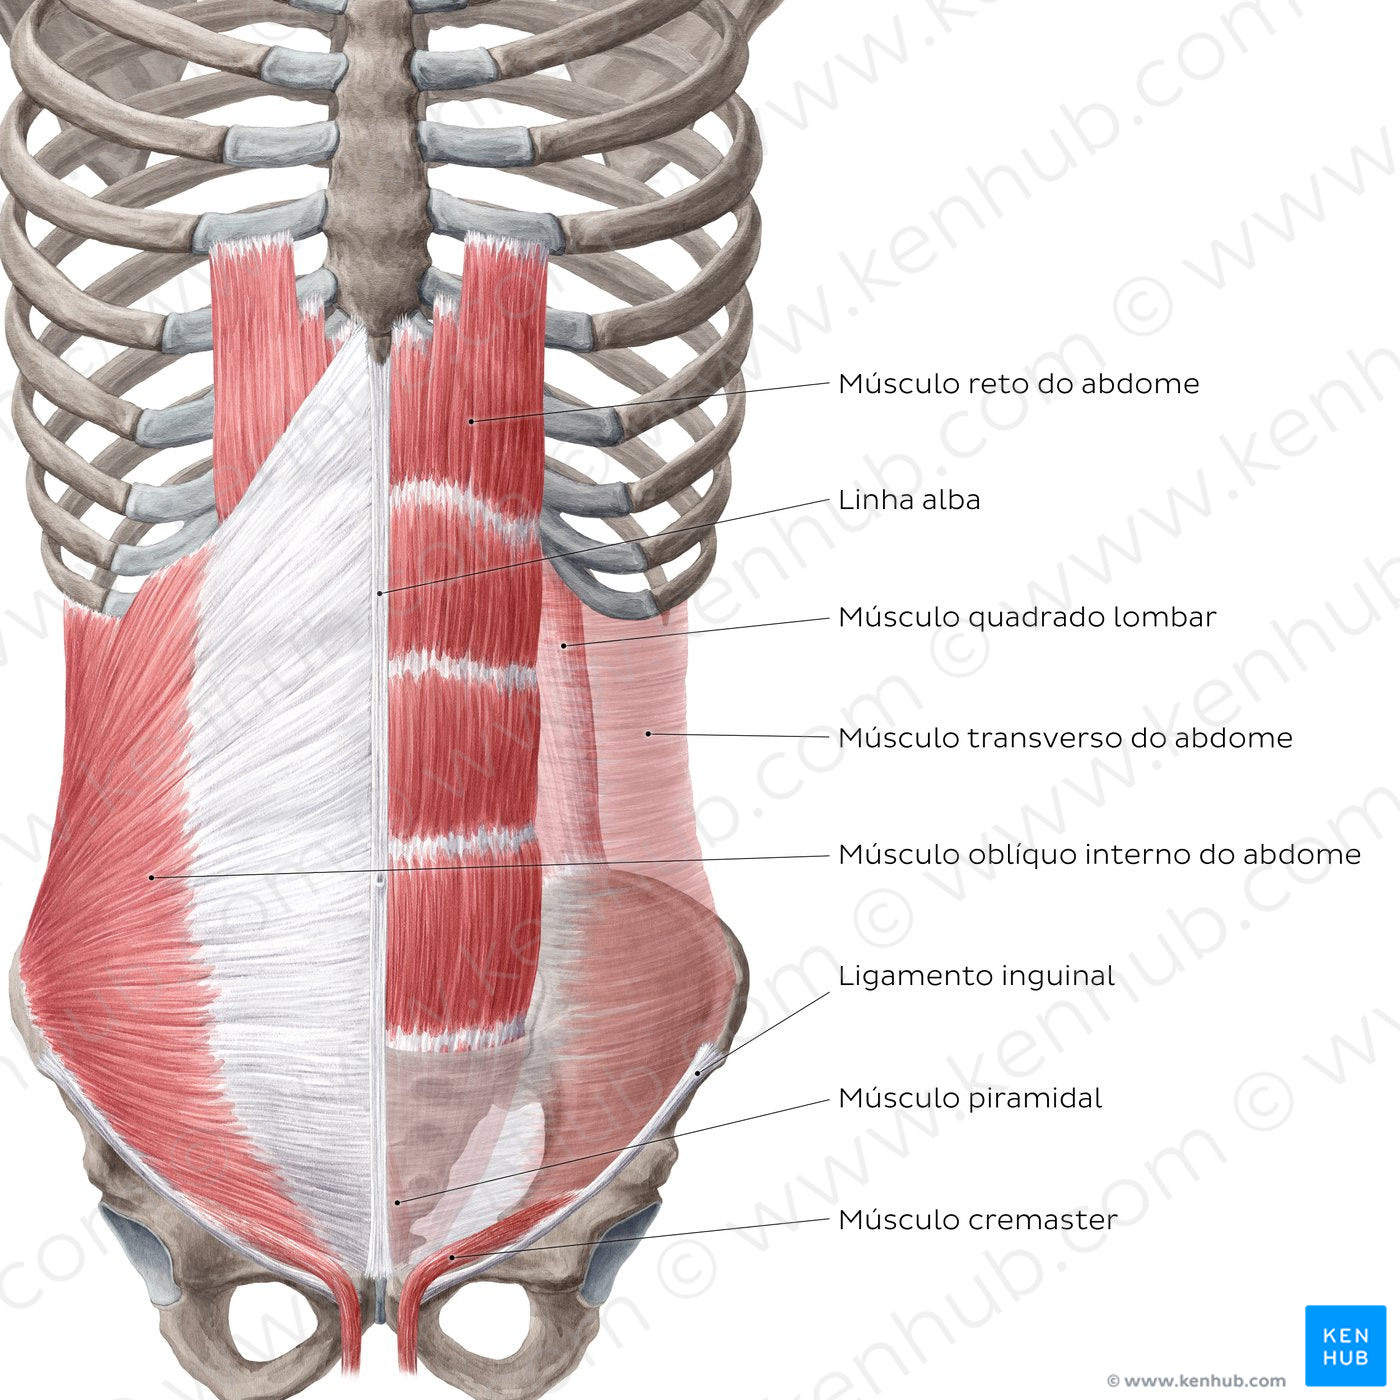 Muscles of the abdominal wall (Portuguese)